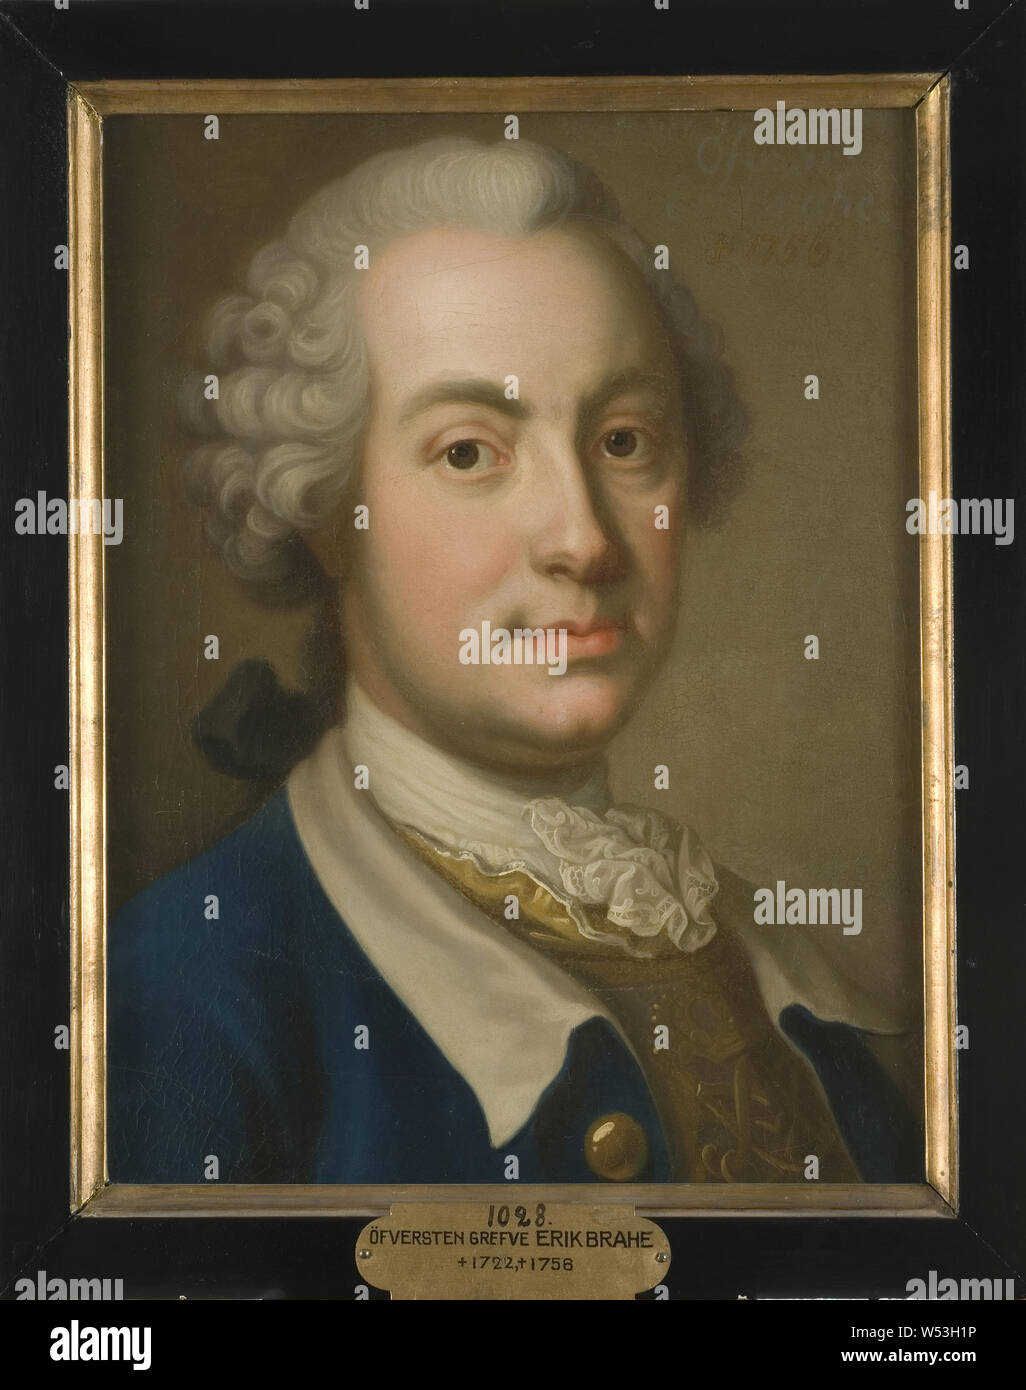 Attributed to Magnus Hallman, Erik Brahe, 1722-1756, painting, oil on canvas, Height, 40 cm (15.7 inches), Width, 32 cm (12.5 inches) Stock Photo